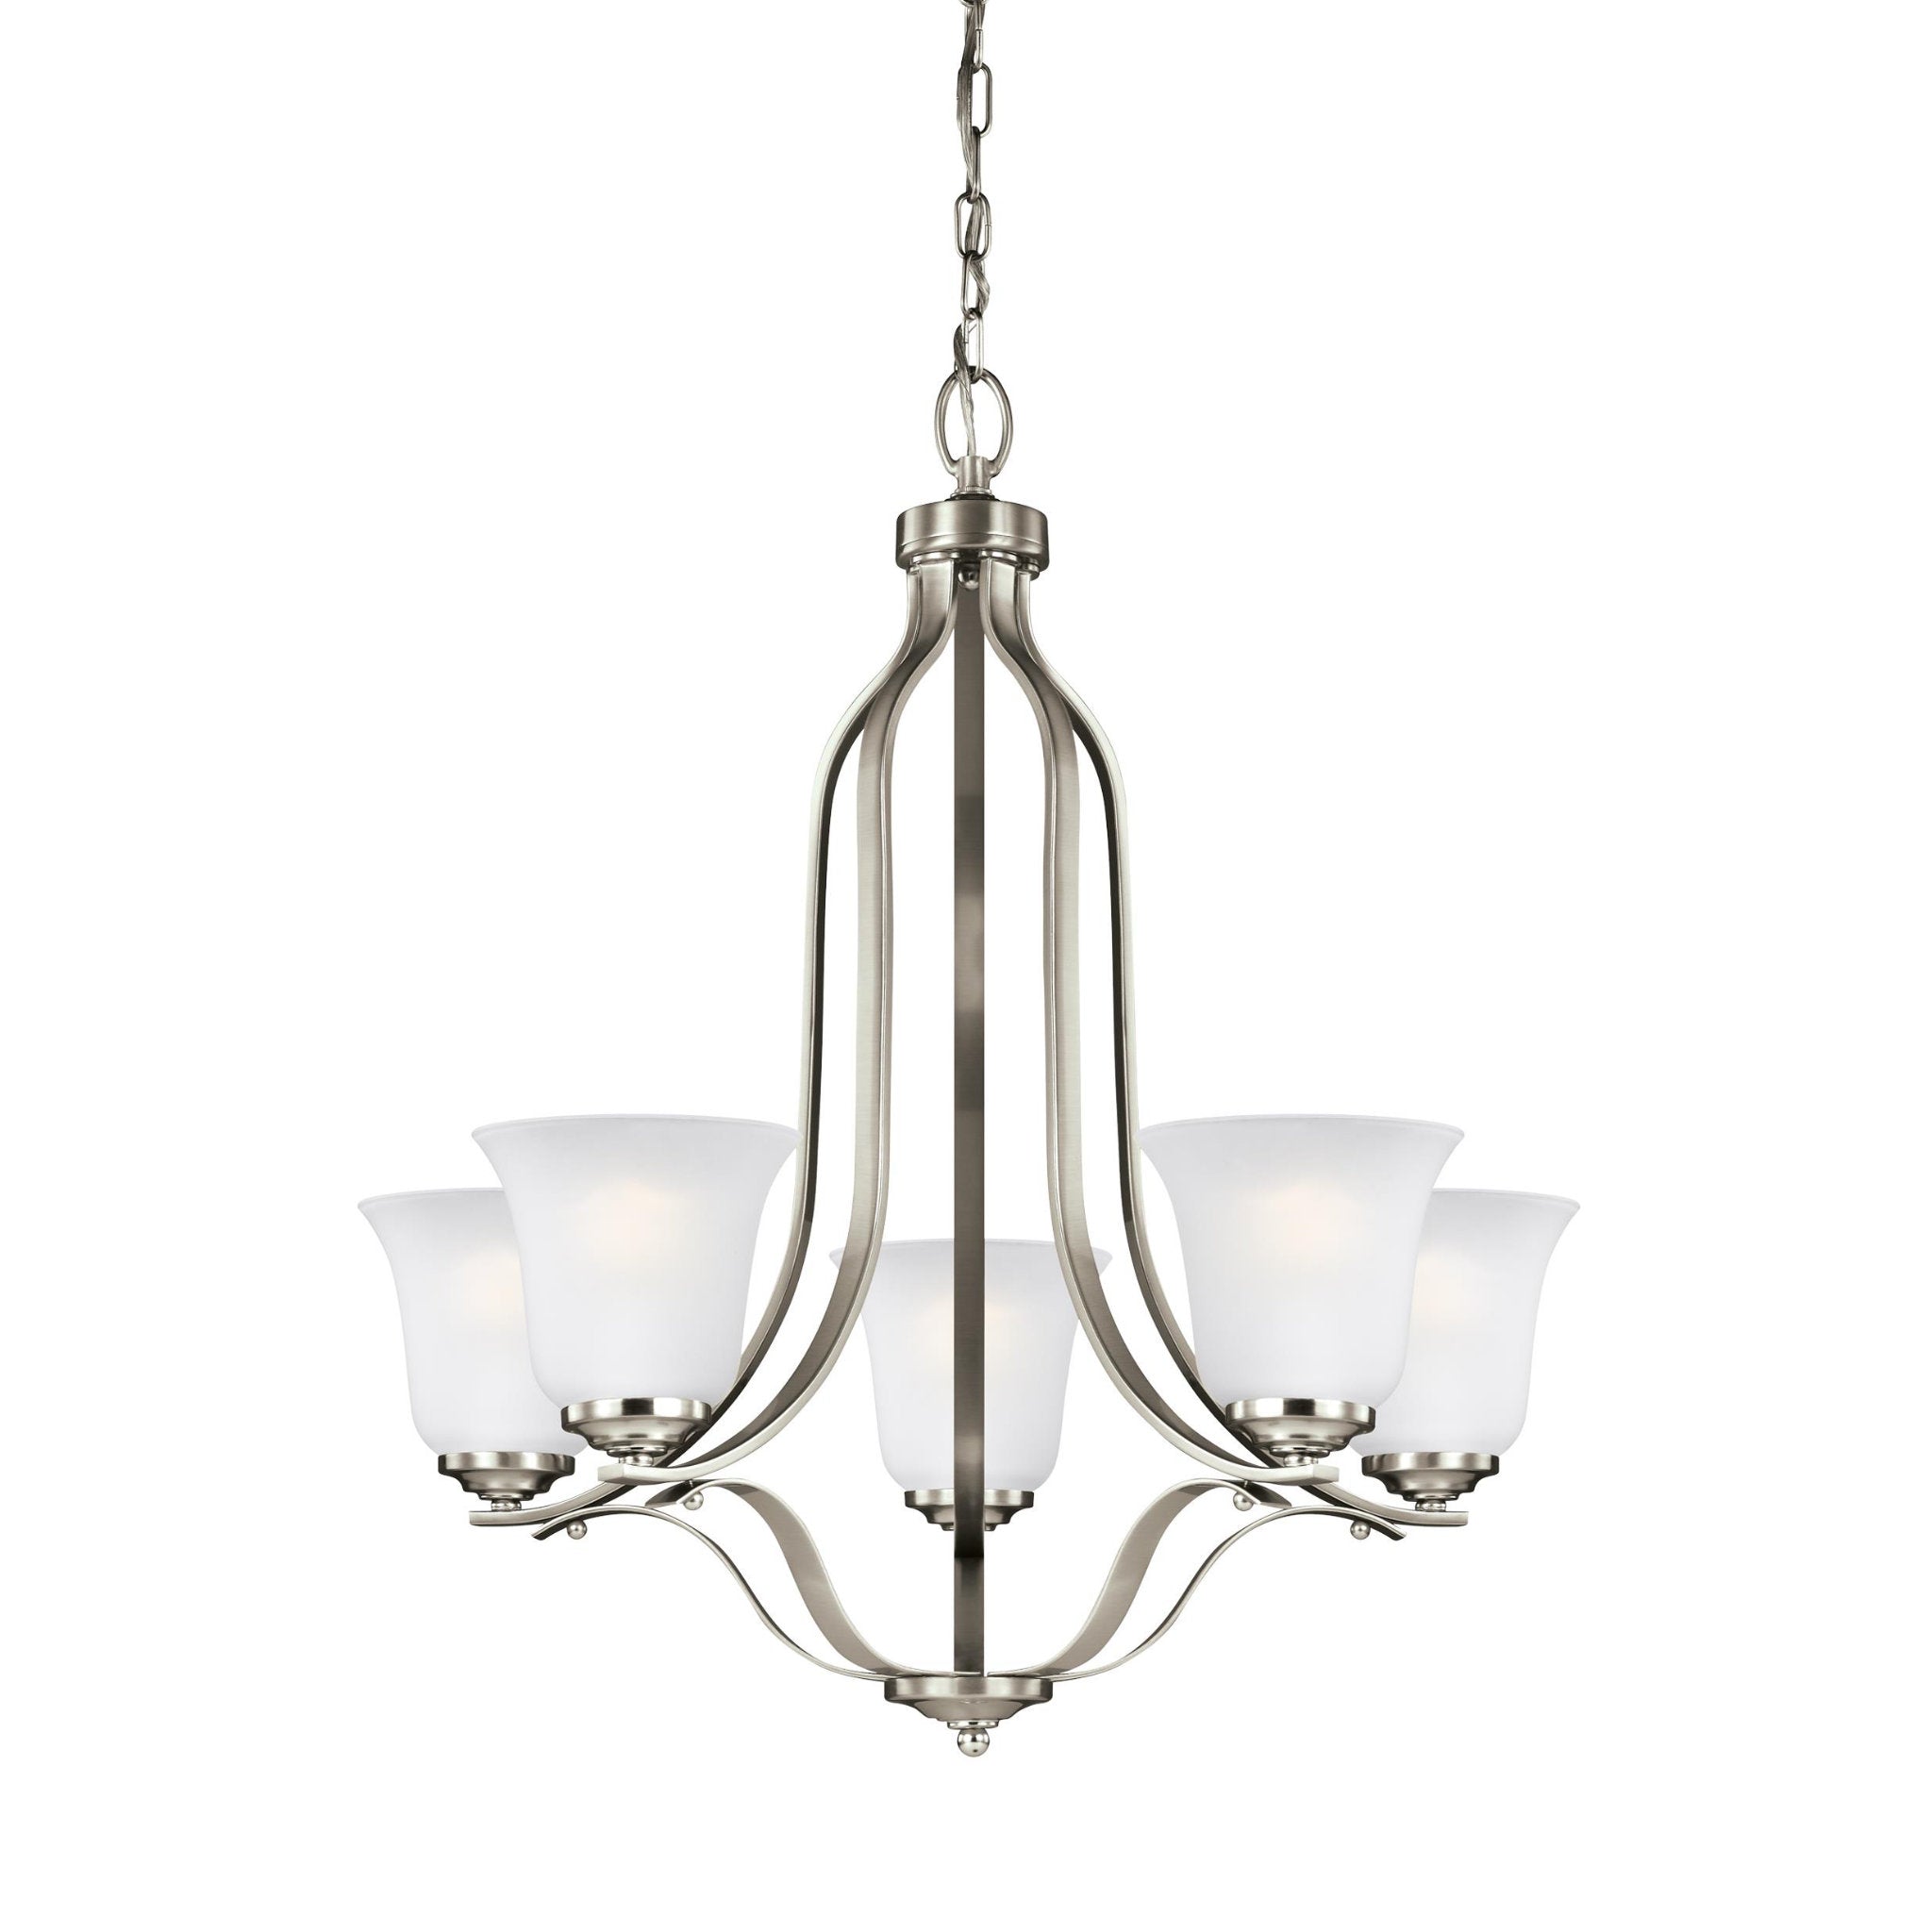 Emmons Five Light Chandelier Traditional 26.75" Height Steel Round Satin Etched Shade in Brushed Nickel